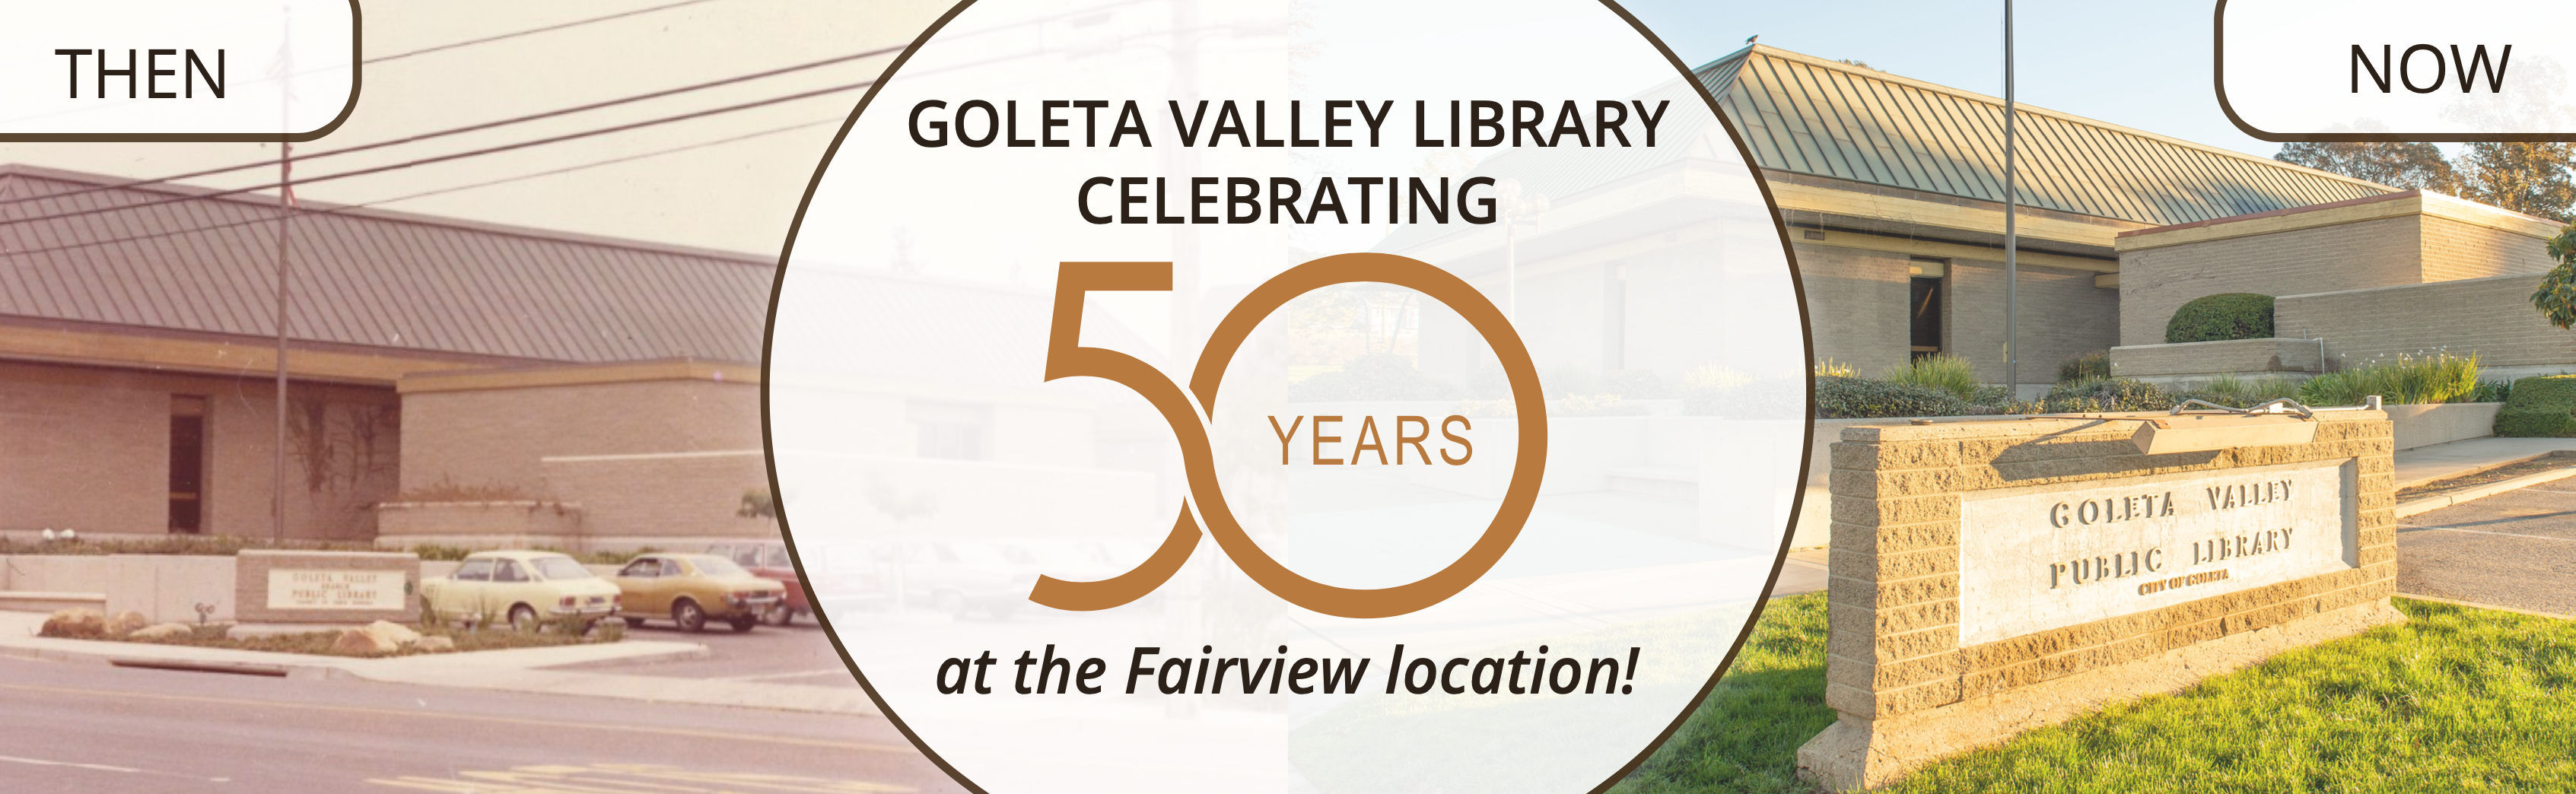 Goleta Valley Library Then and Now